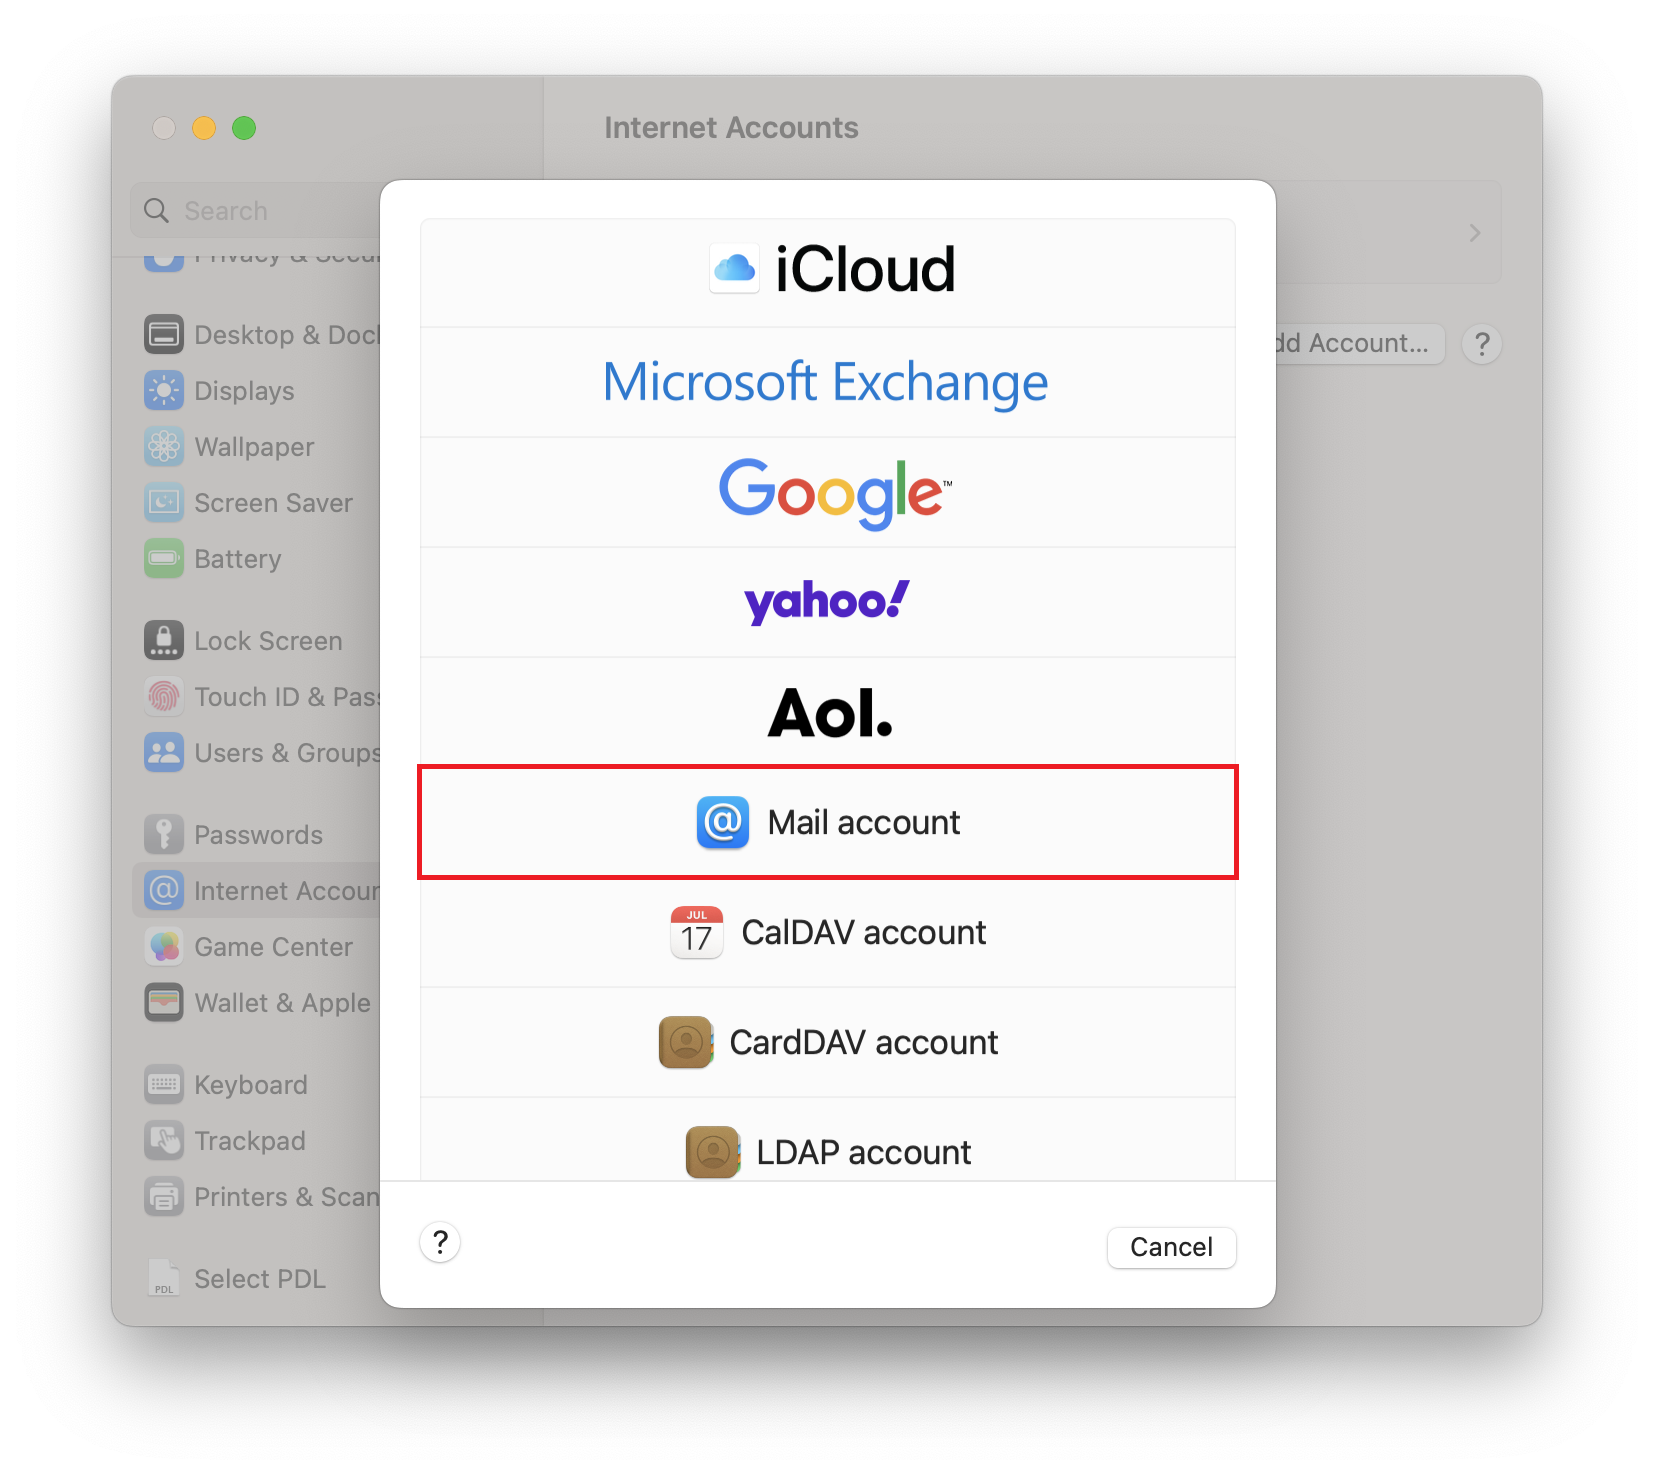 Internet accounts window. Above a new window, one below the other 9 logos, iCloud, Exchange, Google, yahoo exclamation mark, Aol dot, marked Mail account, CalDAV account, CardDAV account, LDAP account, below left, question mark in circle, right Cancel button.